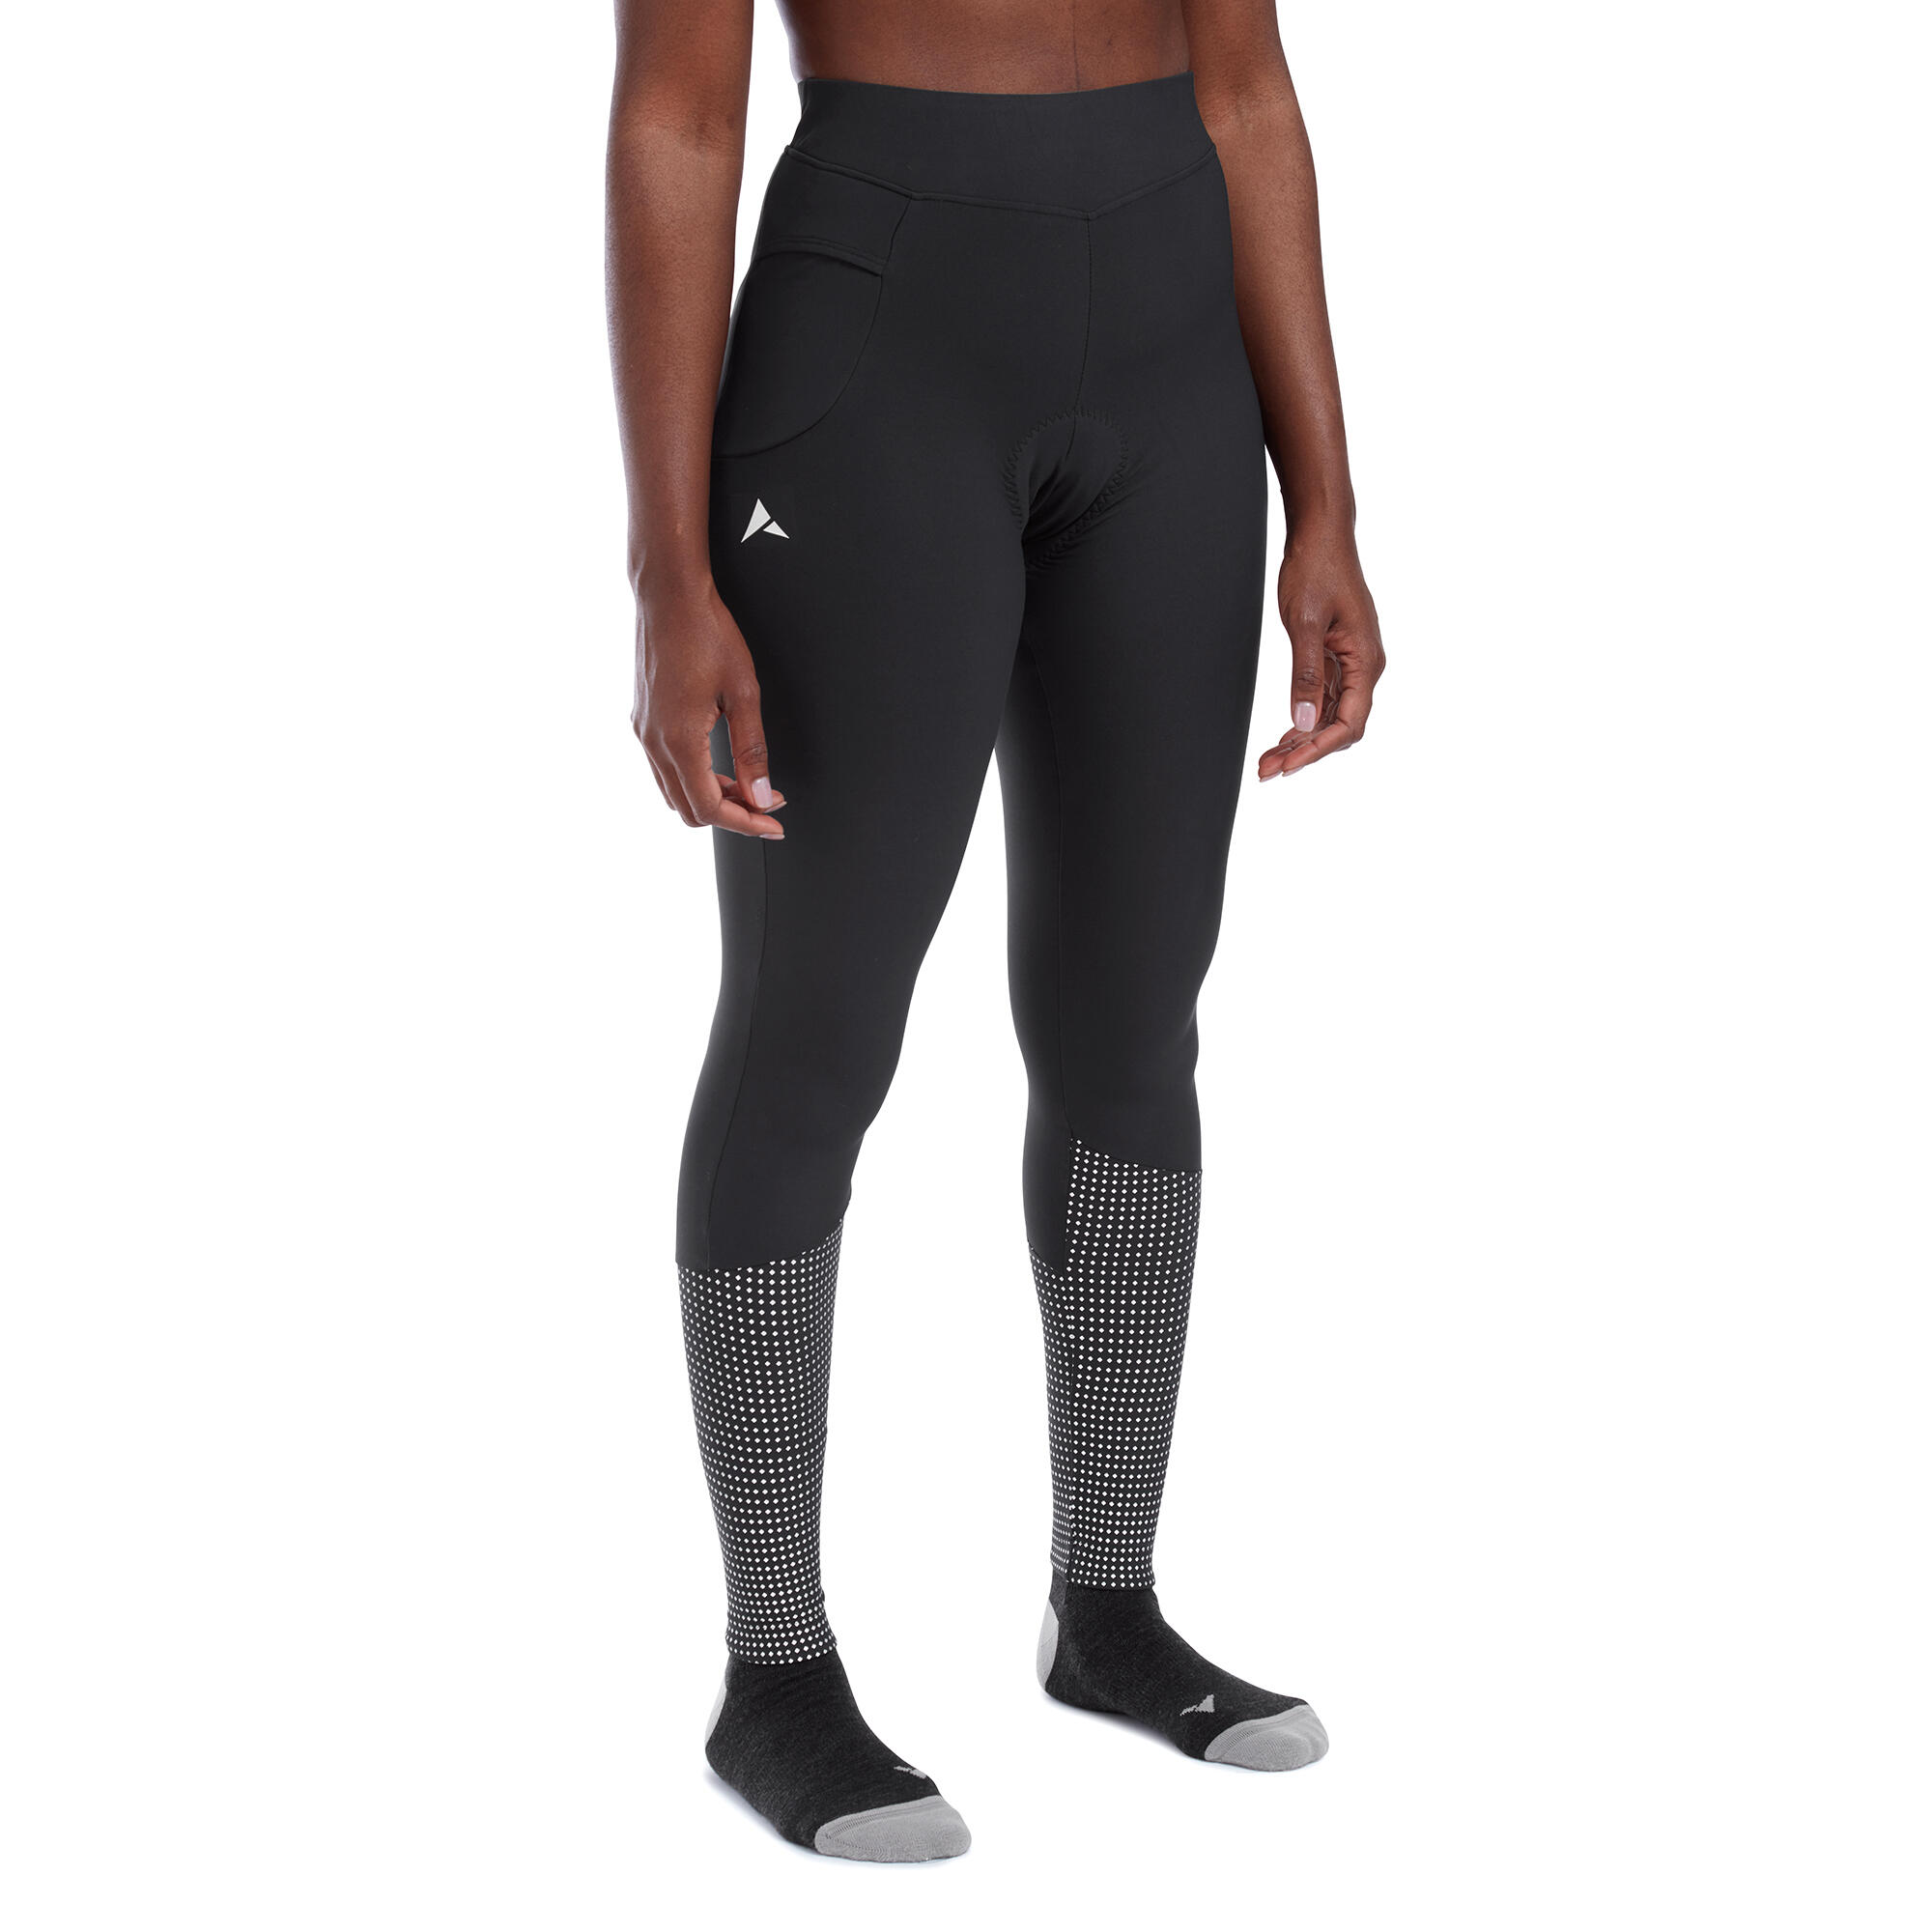 ALTURA Nightvision Dwr Women's Cycling Waist Tights